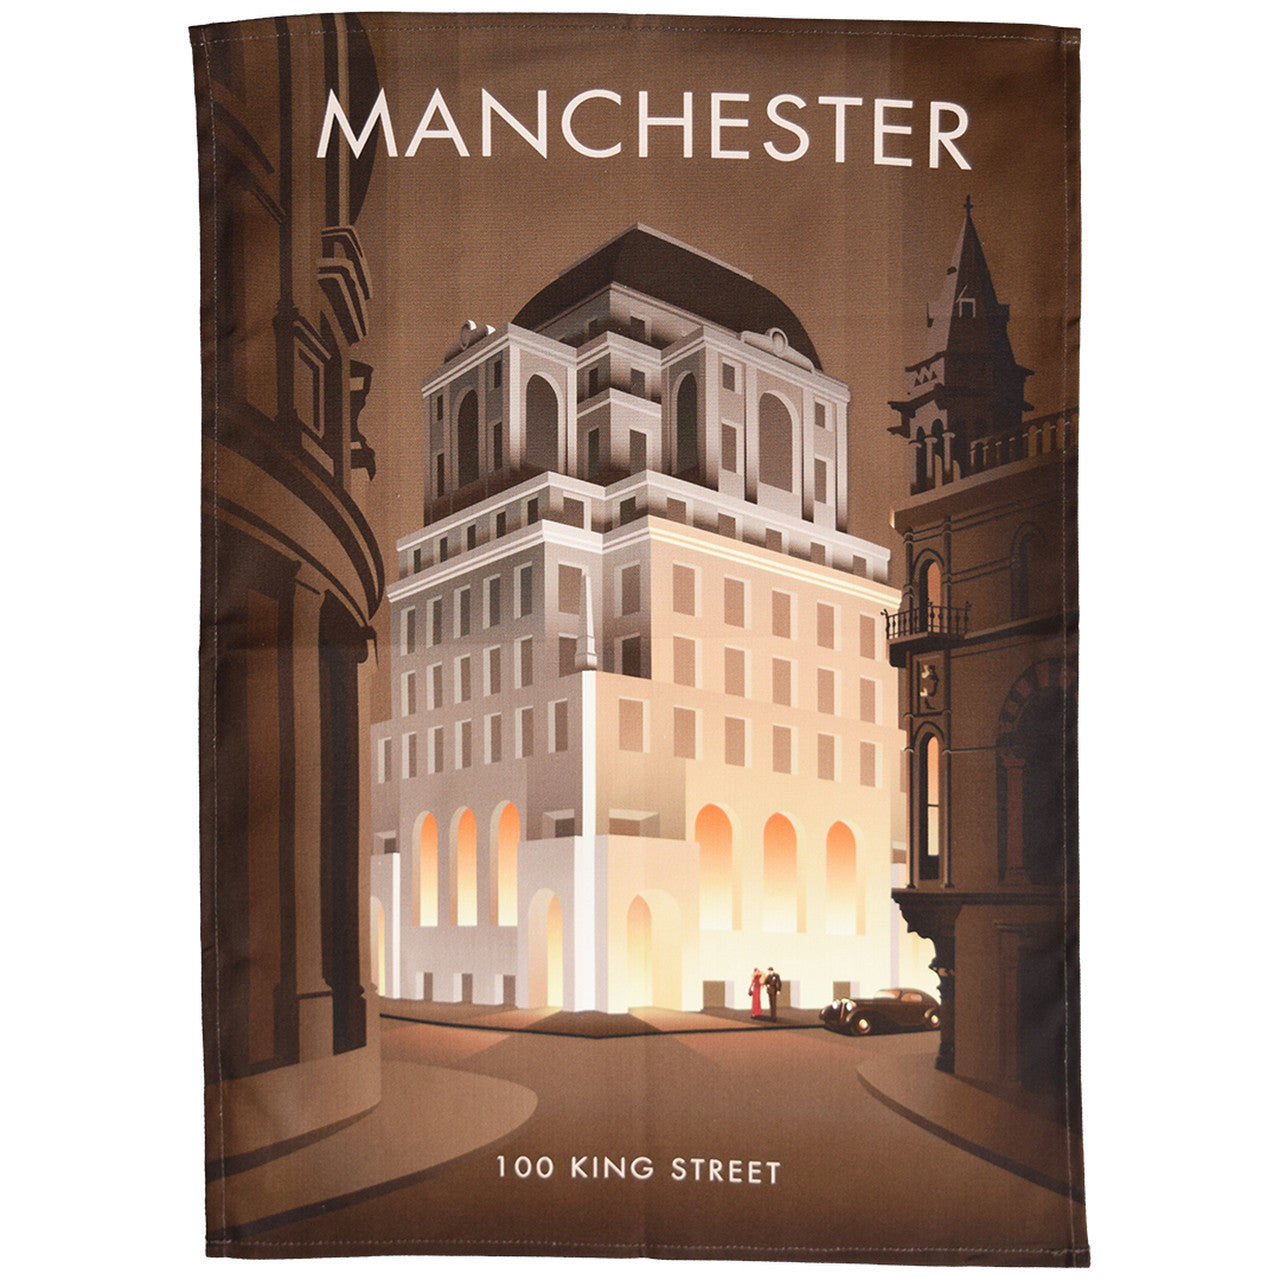 Manchester - 100 King Street Tea Towel by Town Towels.